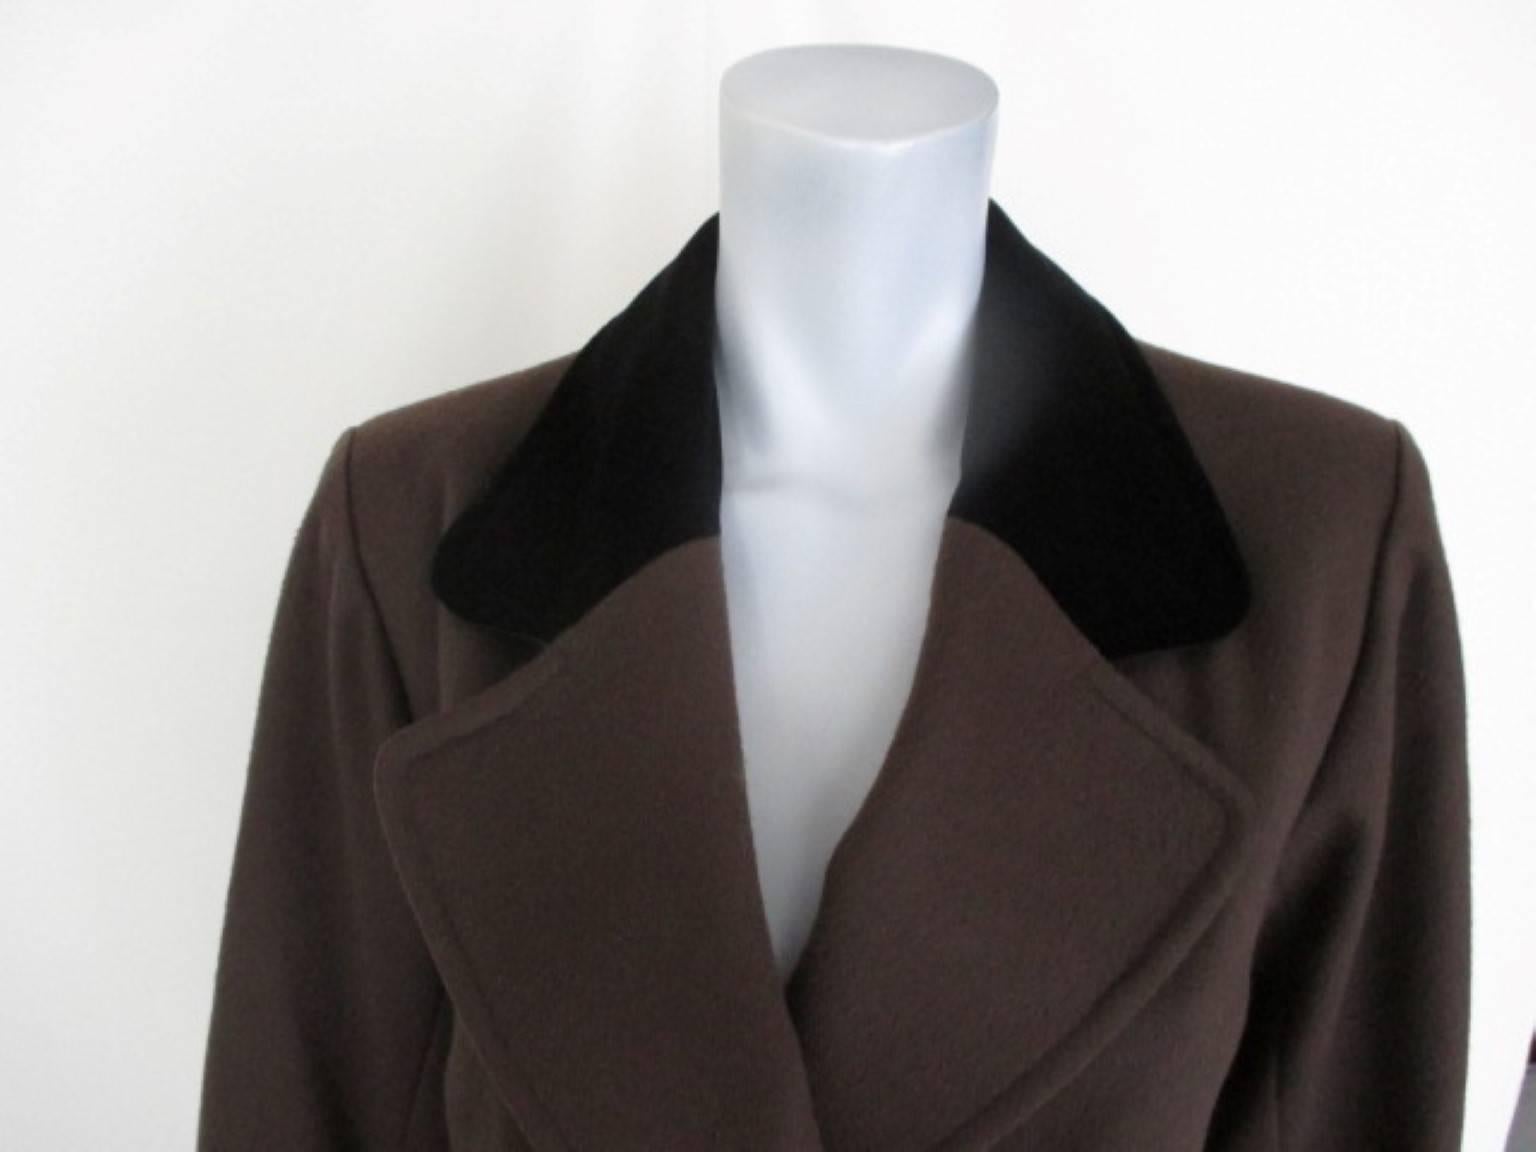 This YSL brown coat is made of wool and has 2 pockets and 2 closing buttons.
Its trimmed with black velvet at cuffs and collar.
Its in good vintage condition
Size is marked France 36